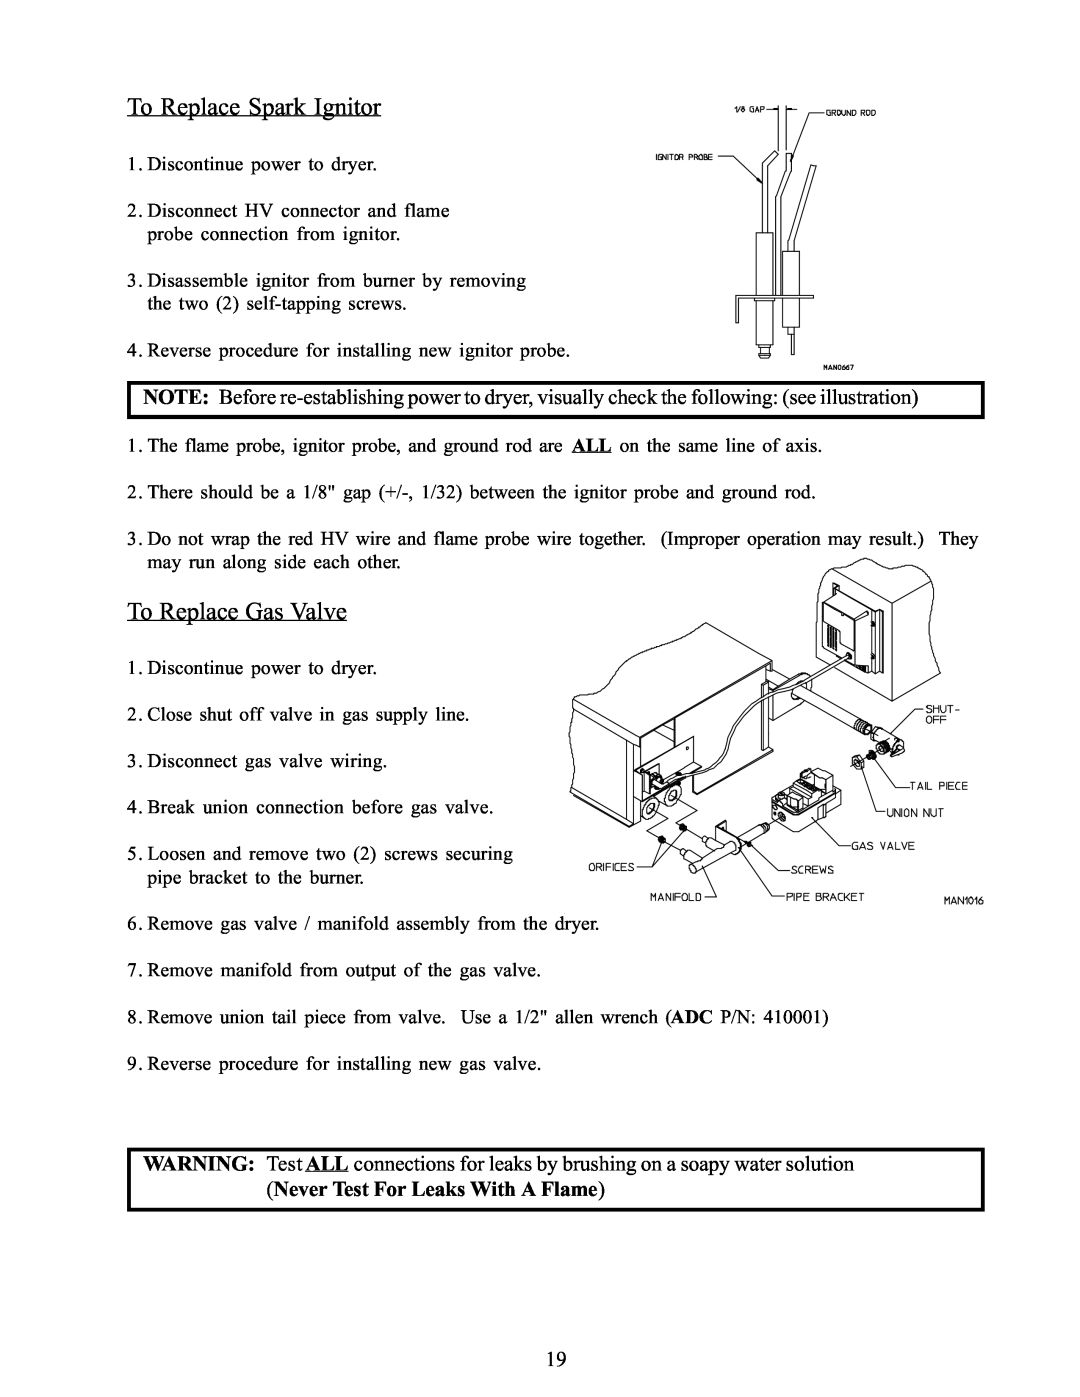 American Dryer Corp WDA-385 service manual To Replace Spark Ignitor, To Replace Gas Valve 